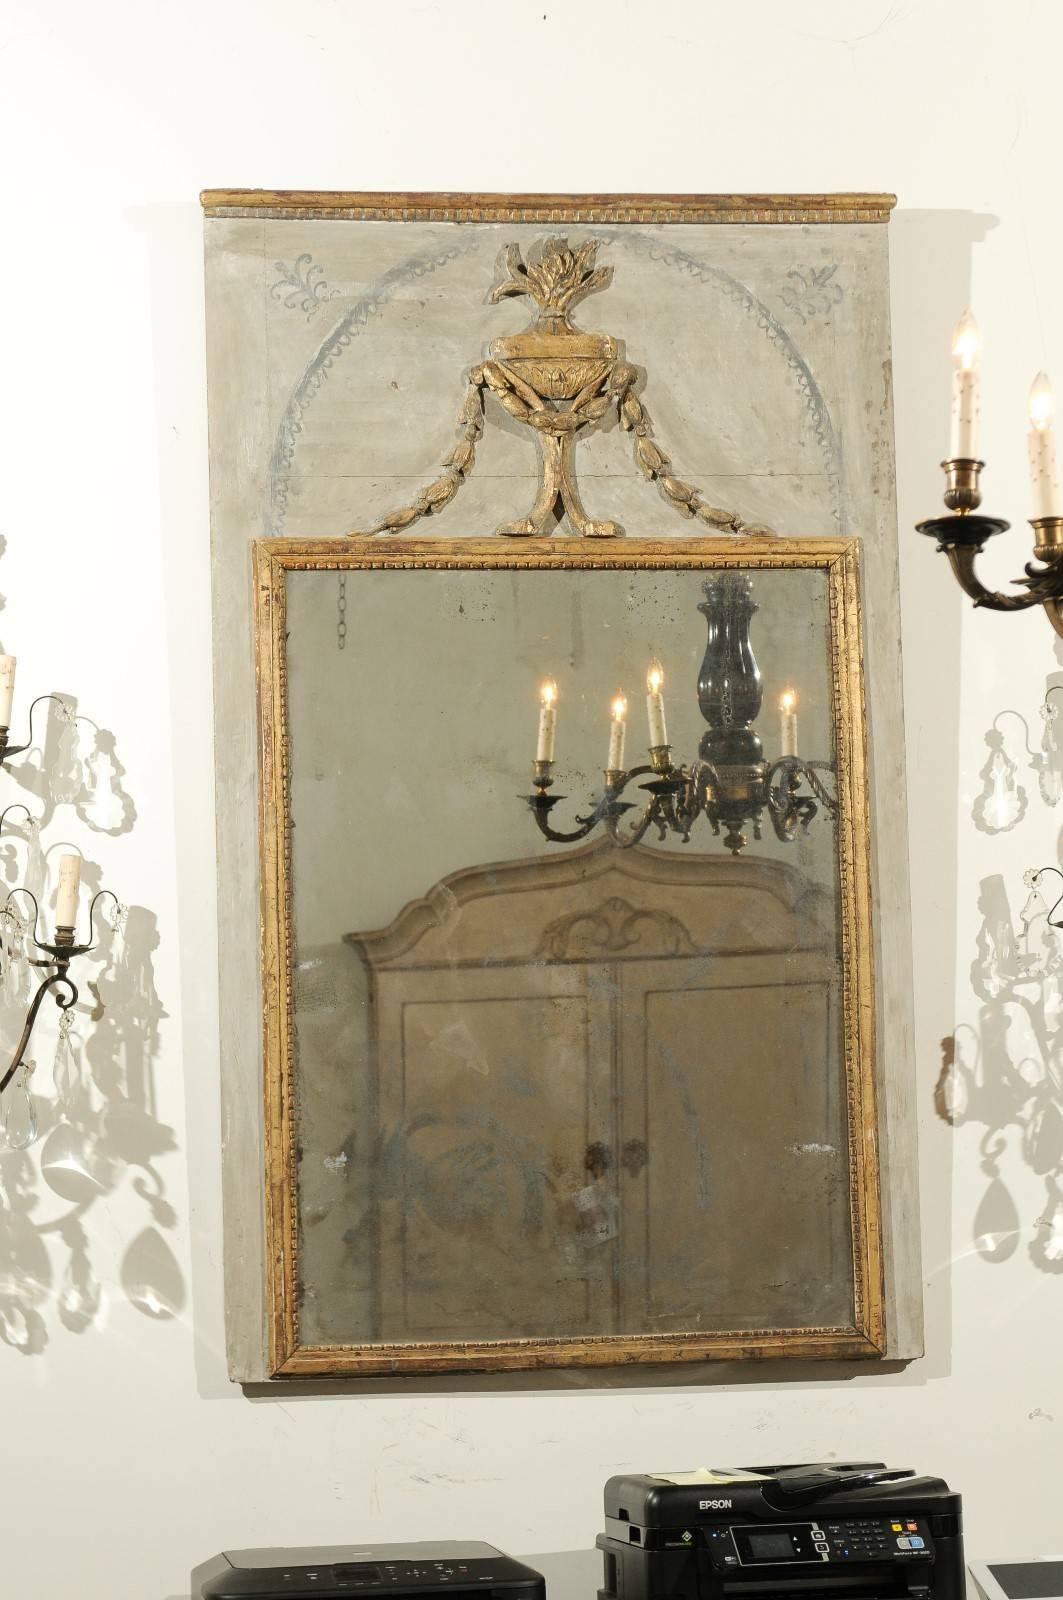 A French neoclassical trumeau mirror with pot-à-feu giltwood motif and mercury glass from the late 18th-early 19th century. This French painted trumeau mirror features a linear profile accented with painted and gilded accents. A dentil molding at